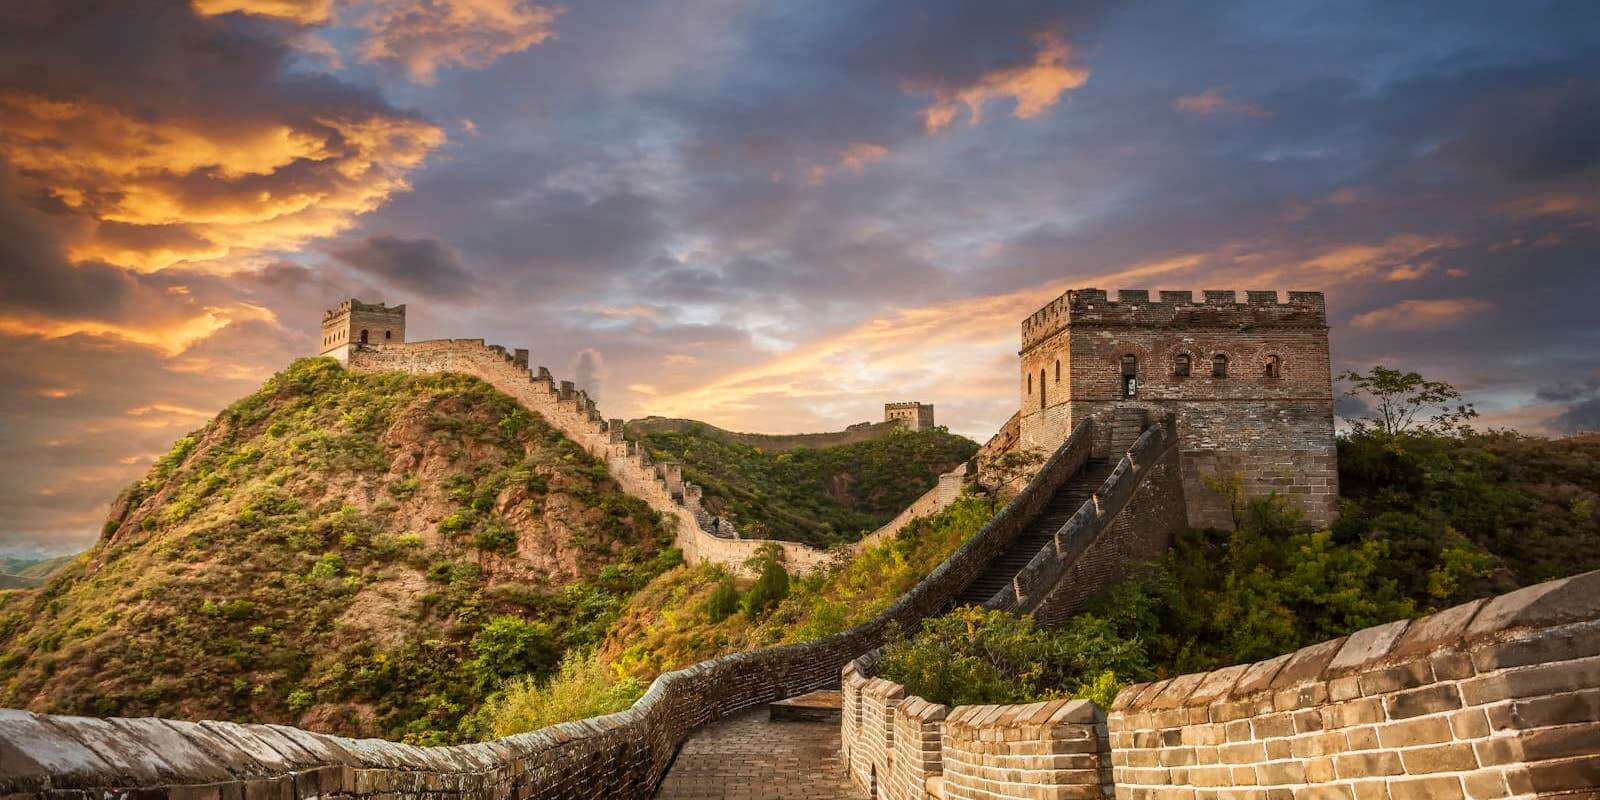 There Is A Great Wall image